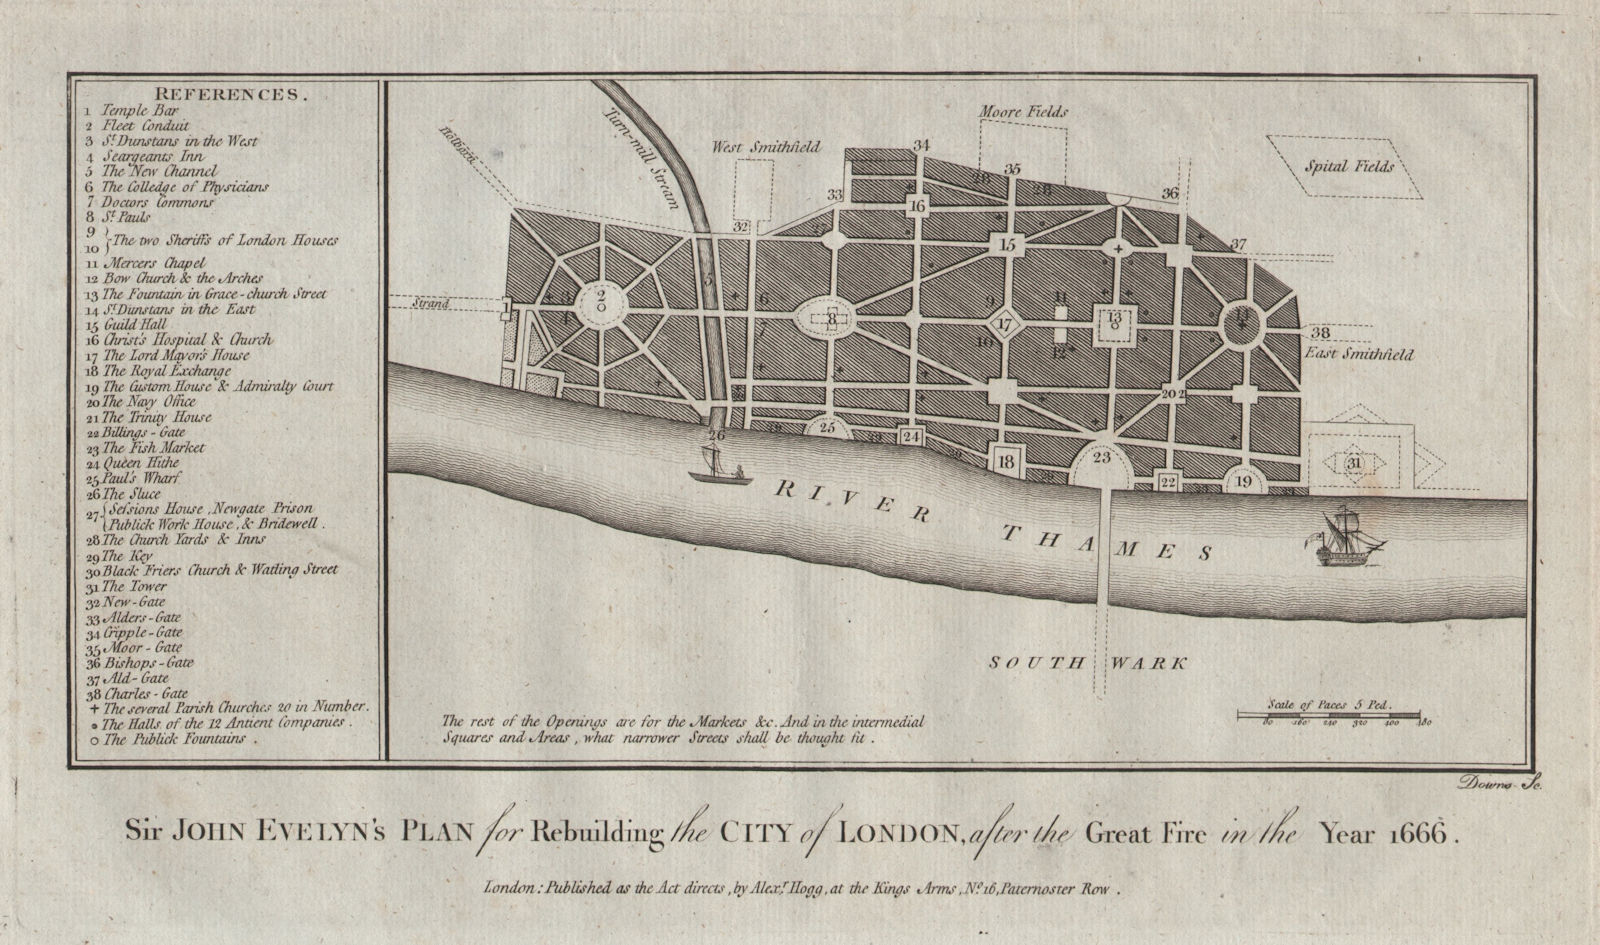 Evelyn's City of London rebuilding plan after the 1666 fire. THORNTON 1784 map